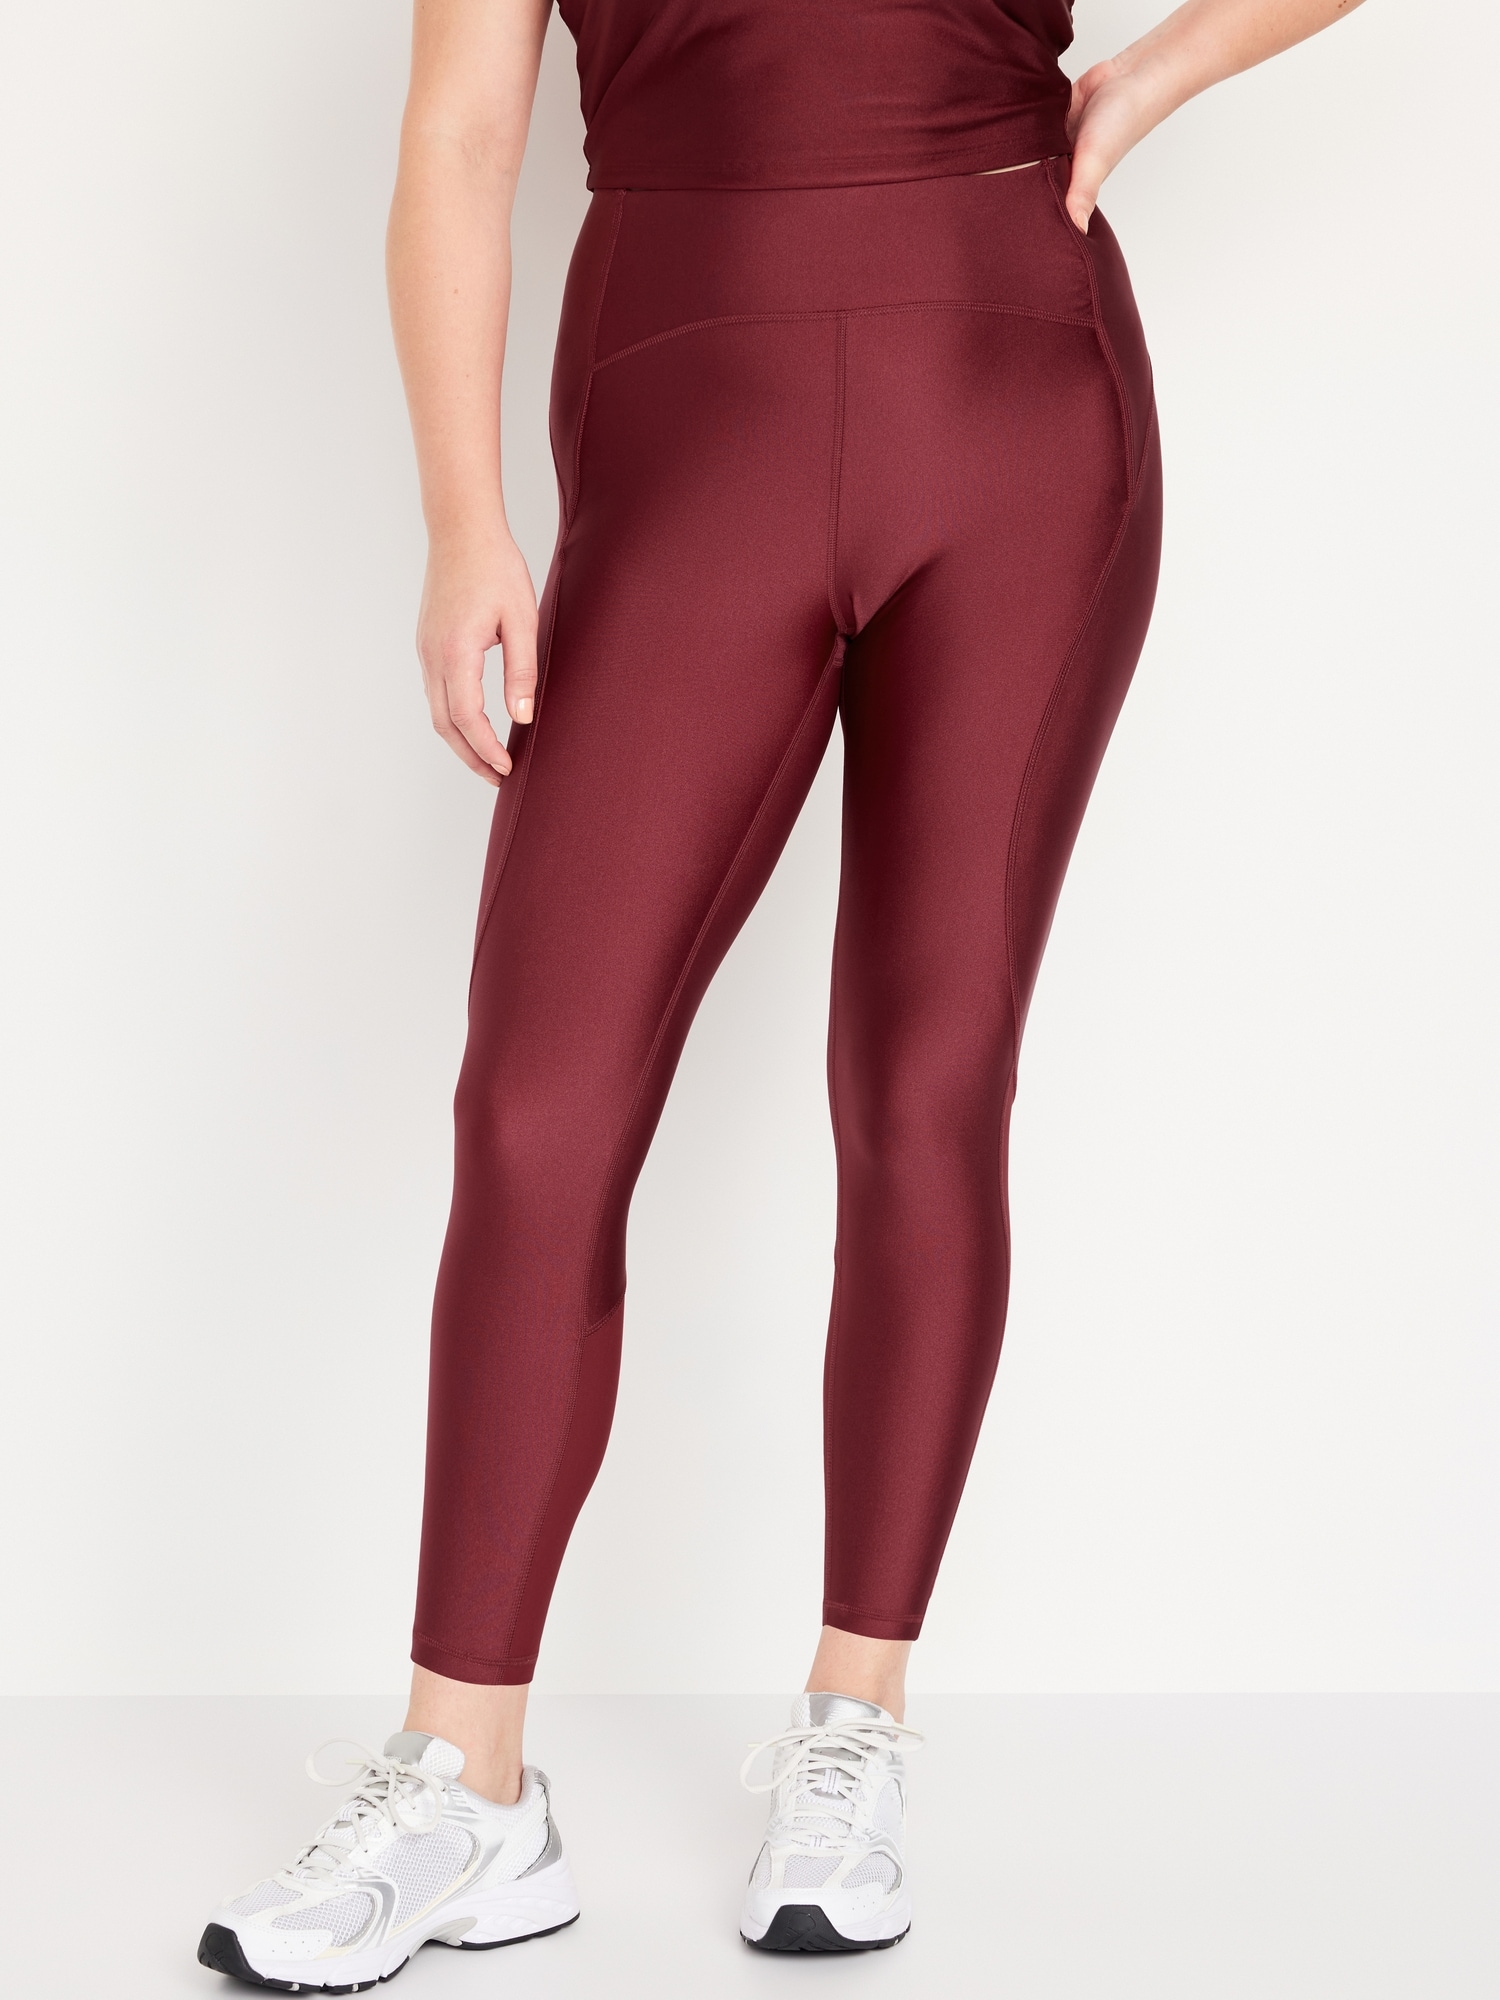 The Old Navy PowerSoft Workout Leggings Are 58 Percent Off